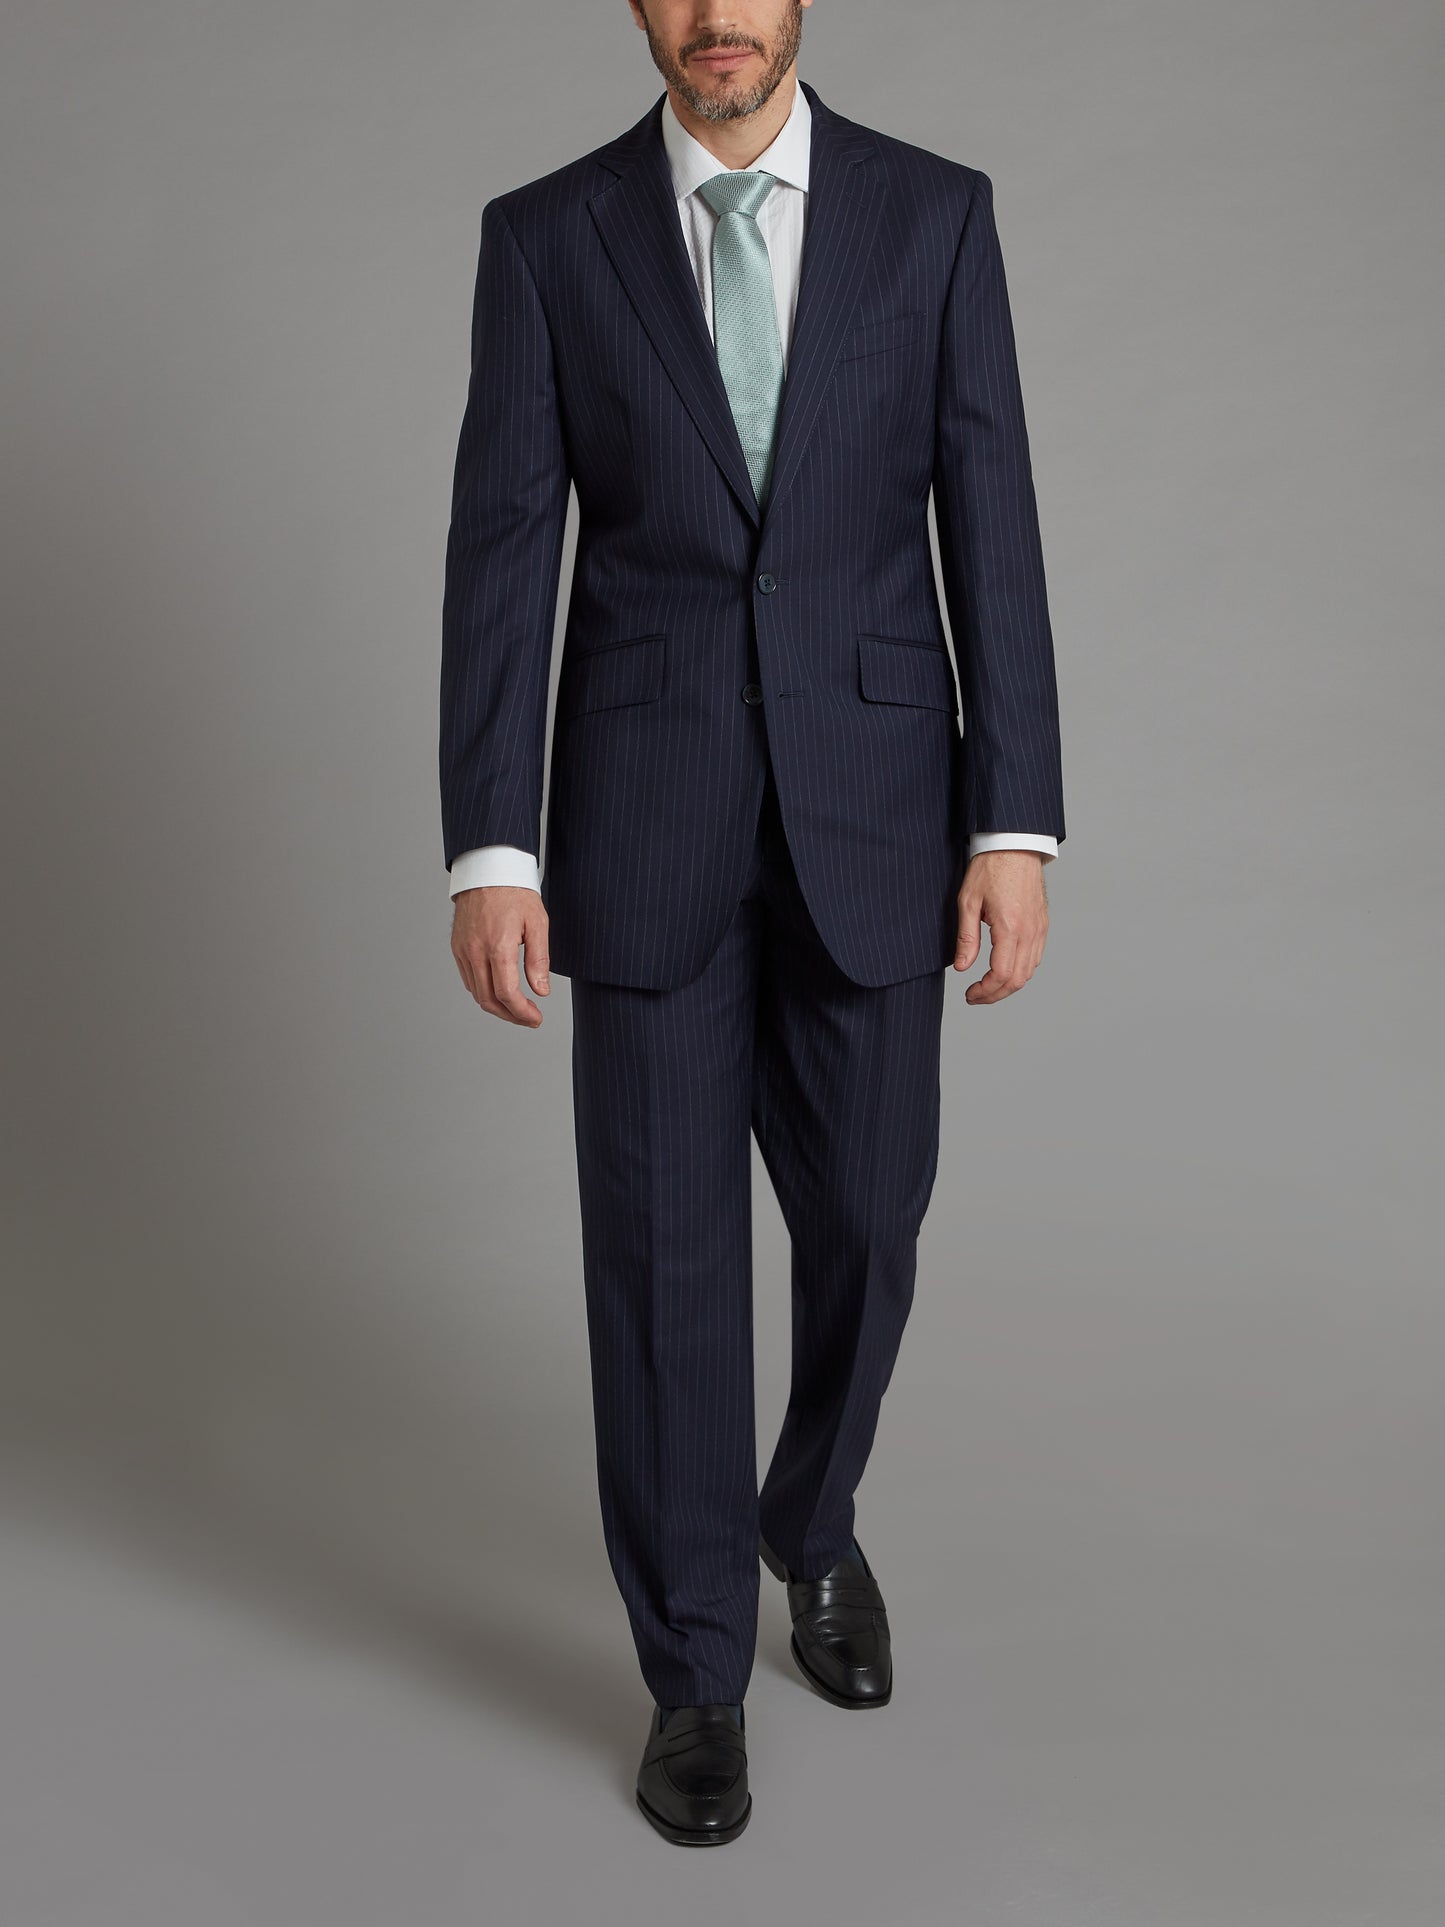 Limited Edition Eaton Suit - Lightweight Navy Pinstripe